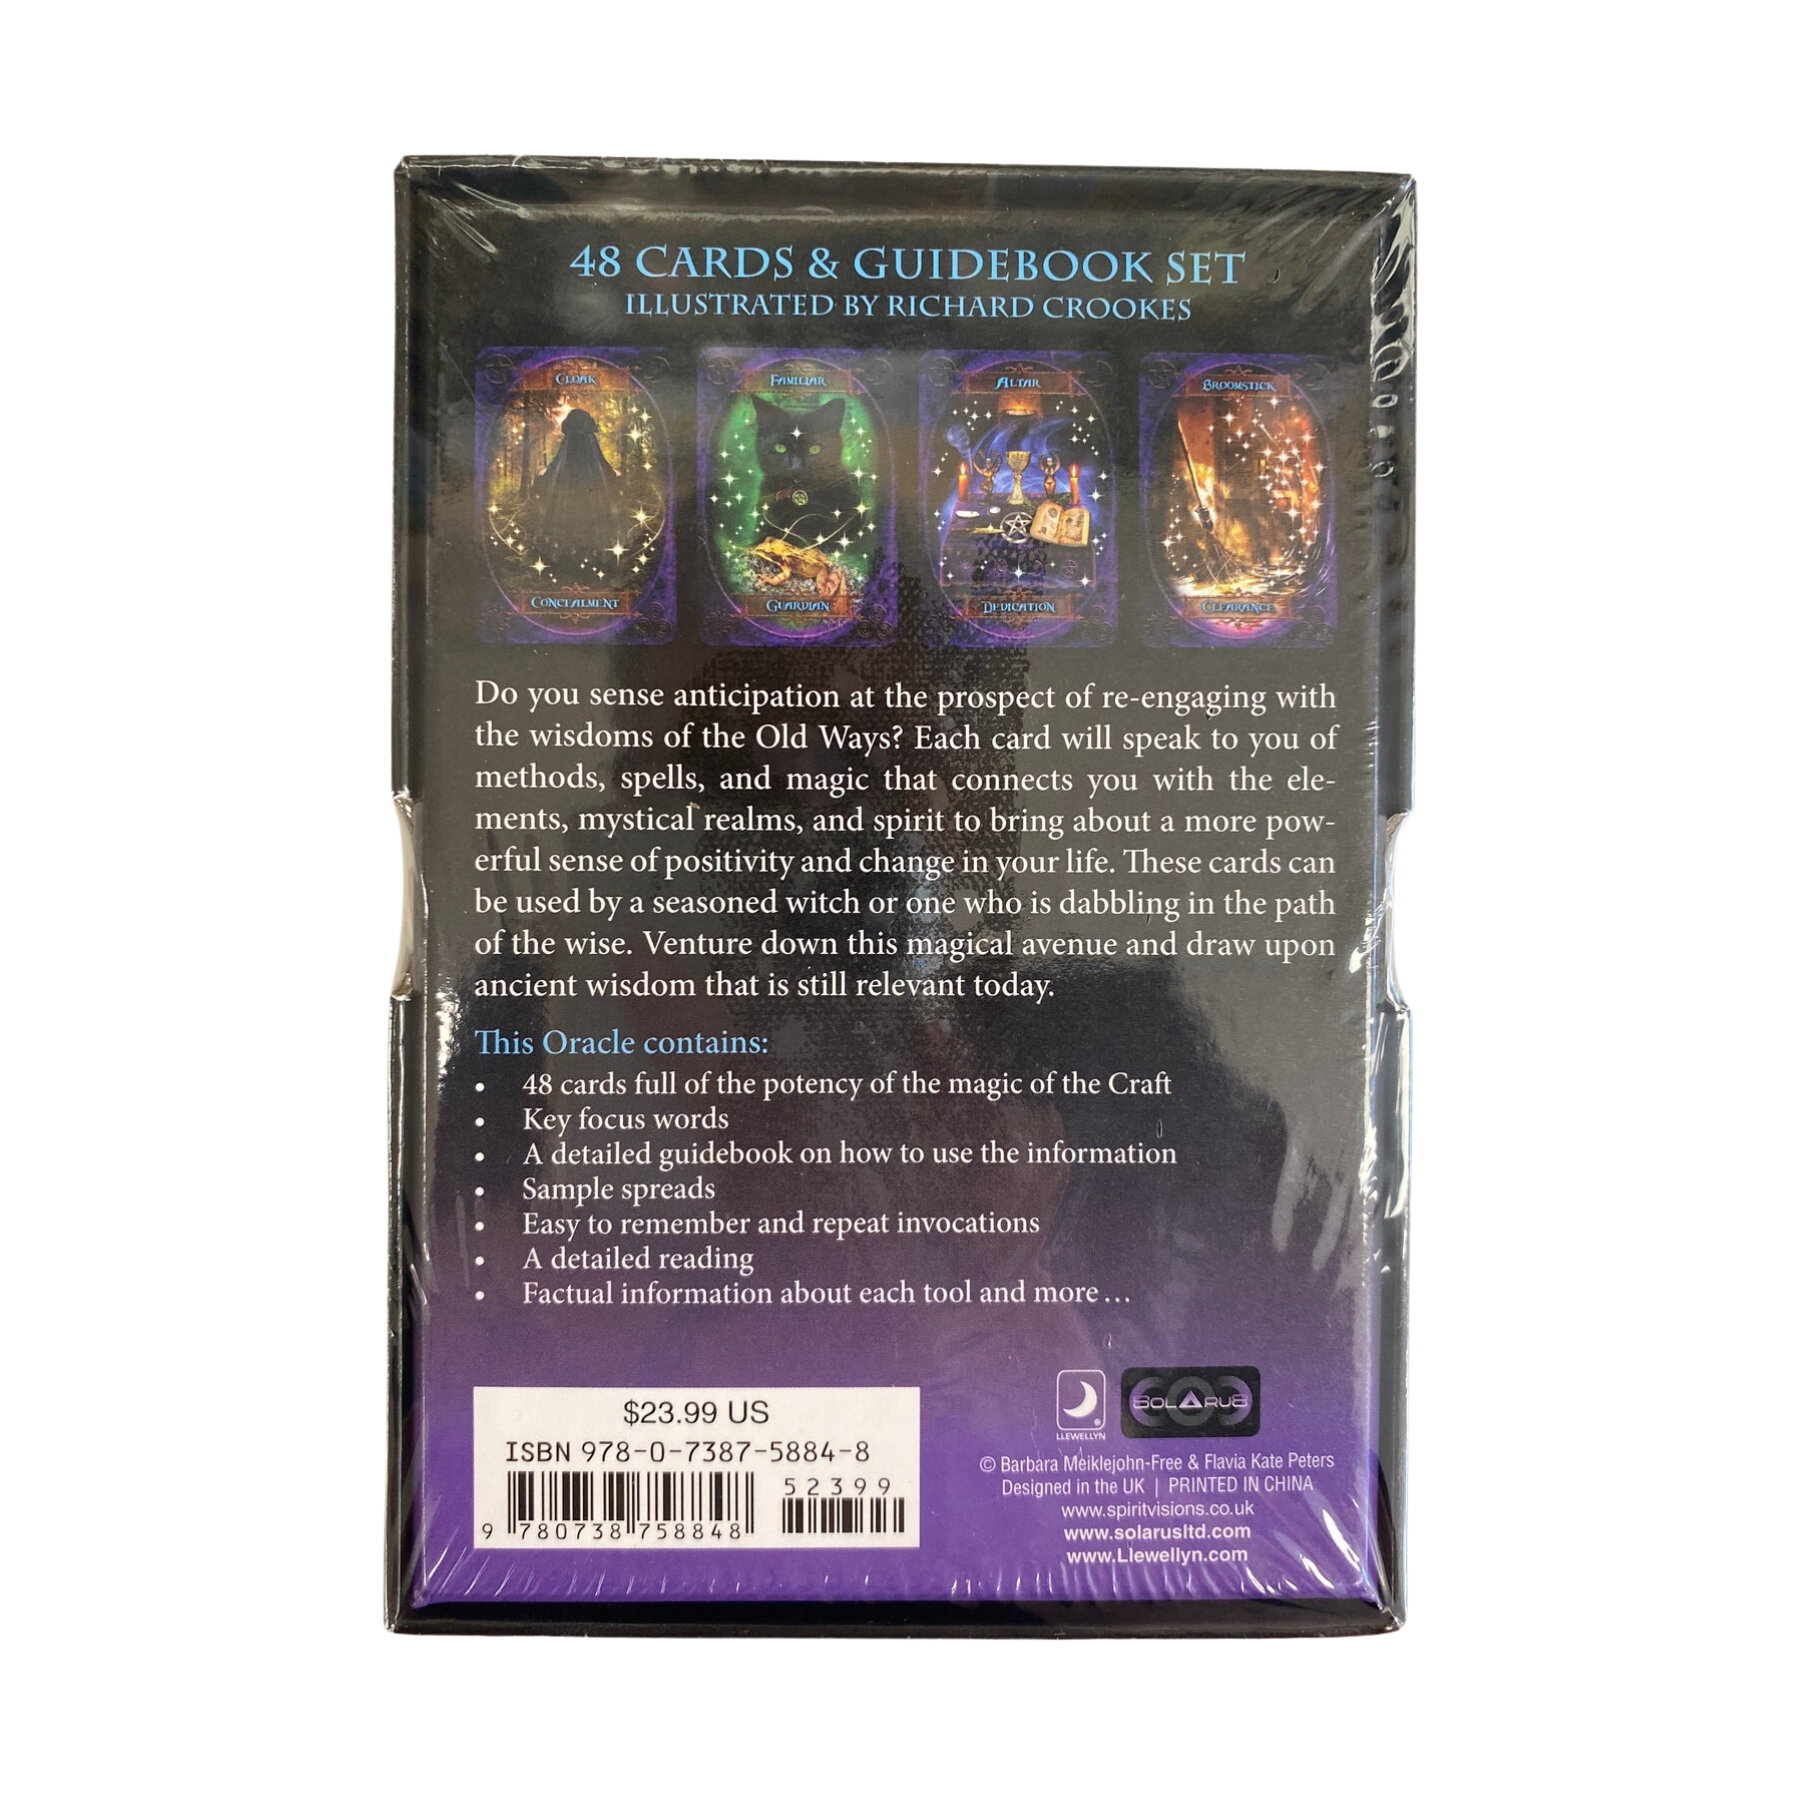 Witches Wisdom Oracle Deck back cover